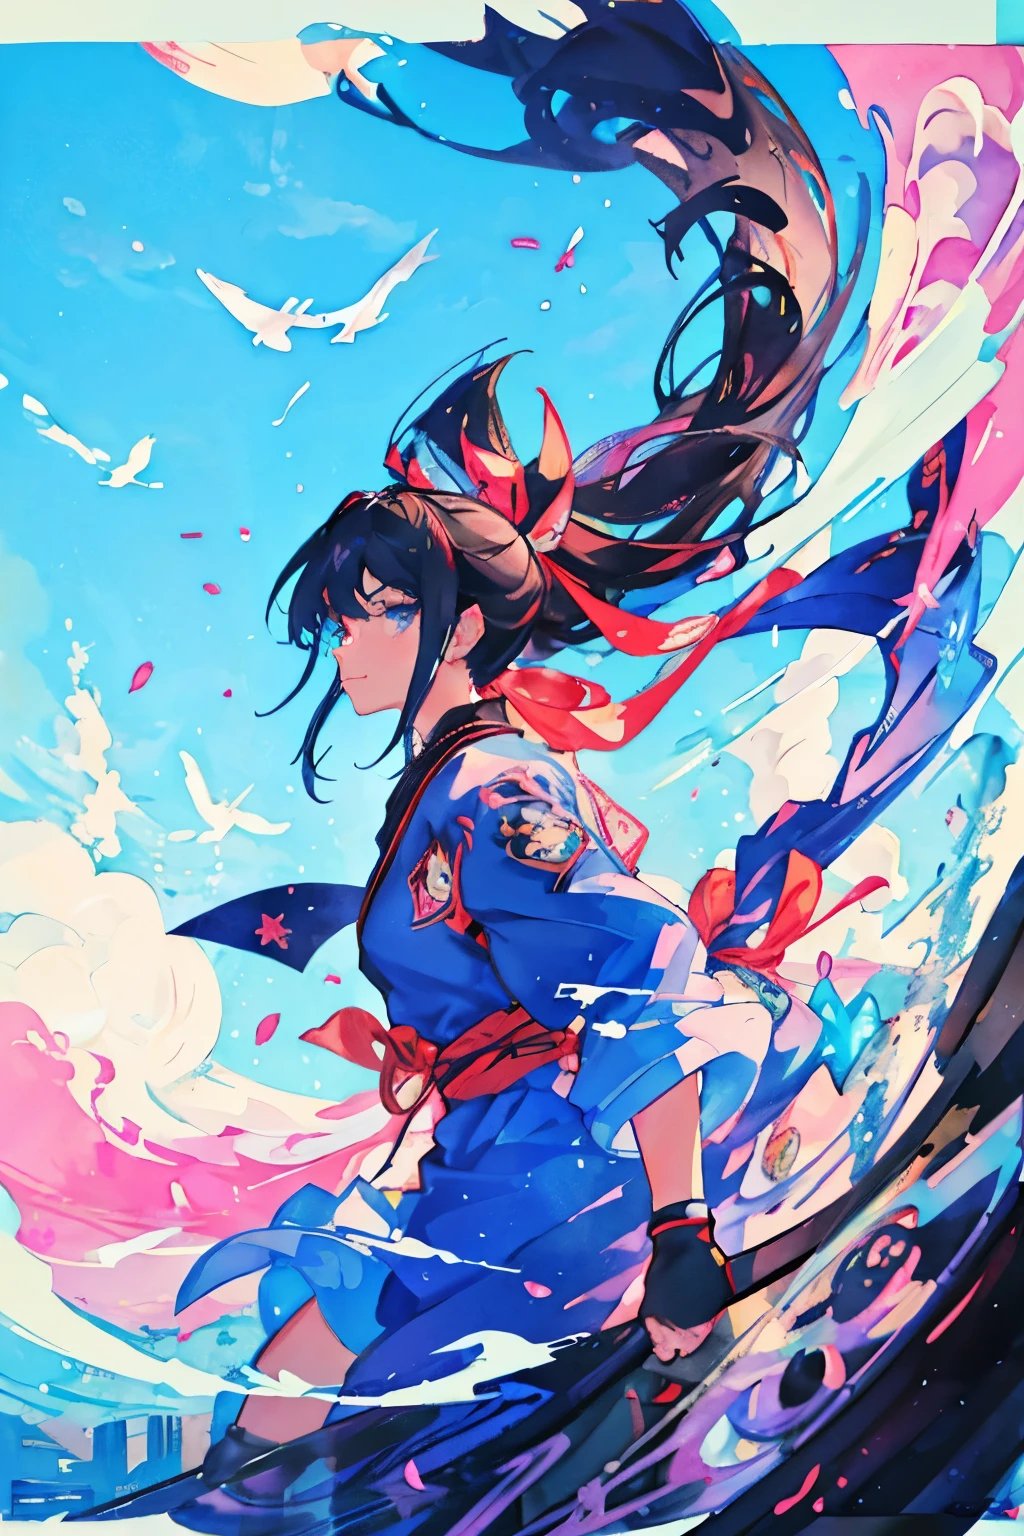 Luxury masterpiece, highest quality,
colorful smoke
One girl, ninja, comic style, anime style illustration, ninja outfit, cool, cute, beautiful face, hair tied with a red ribbon, beautiful sky blue hair, shuriken in hand, shuriken on side of face Poised, from the side, watercolor, colorful, glitter, brush-painted art, blue eyes, watercolor clouds in the background, standing on a tree, overlooking the city